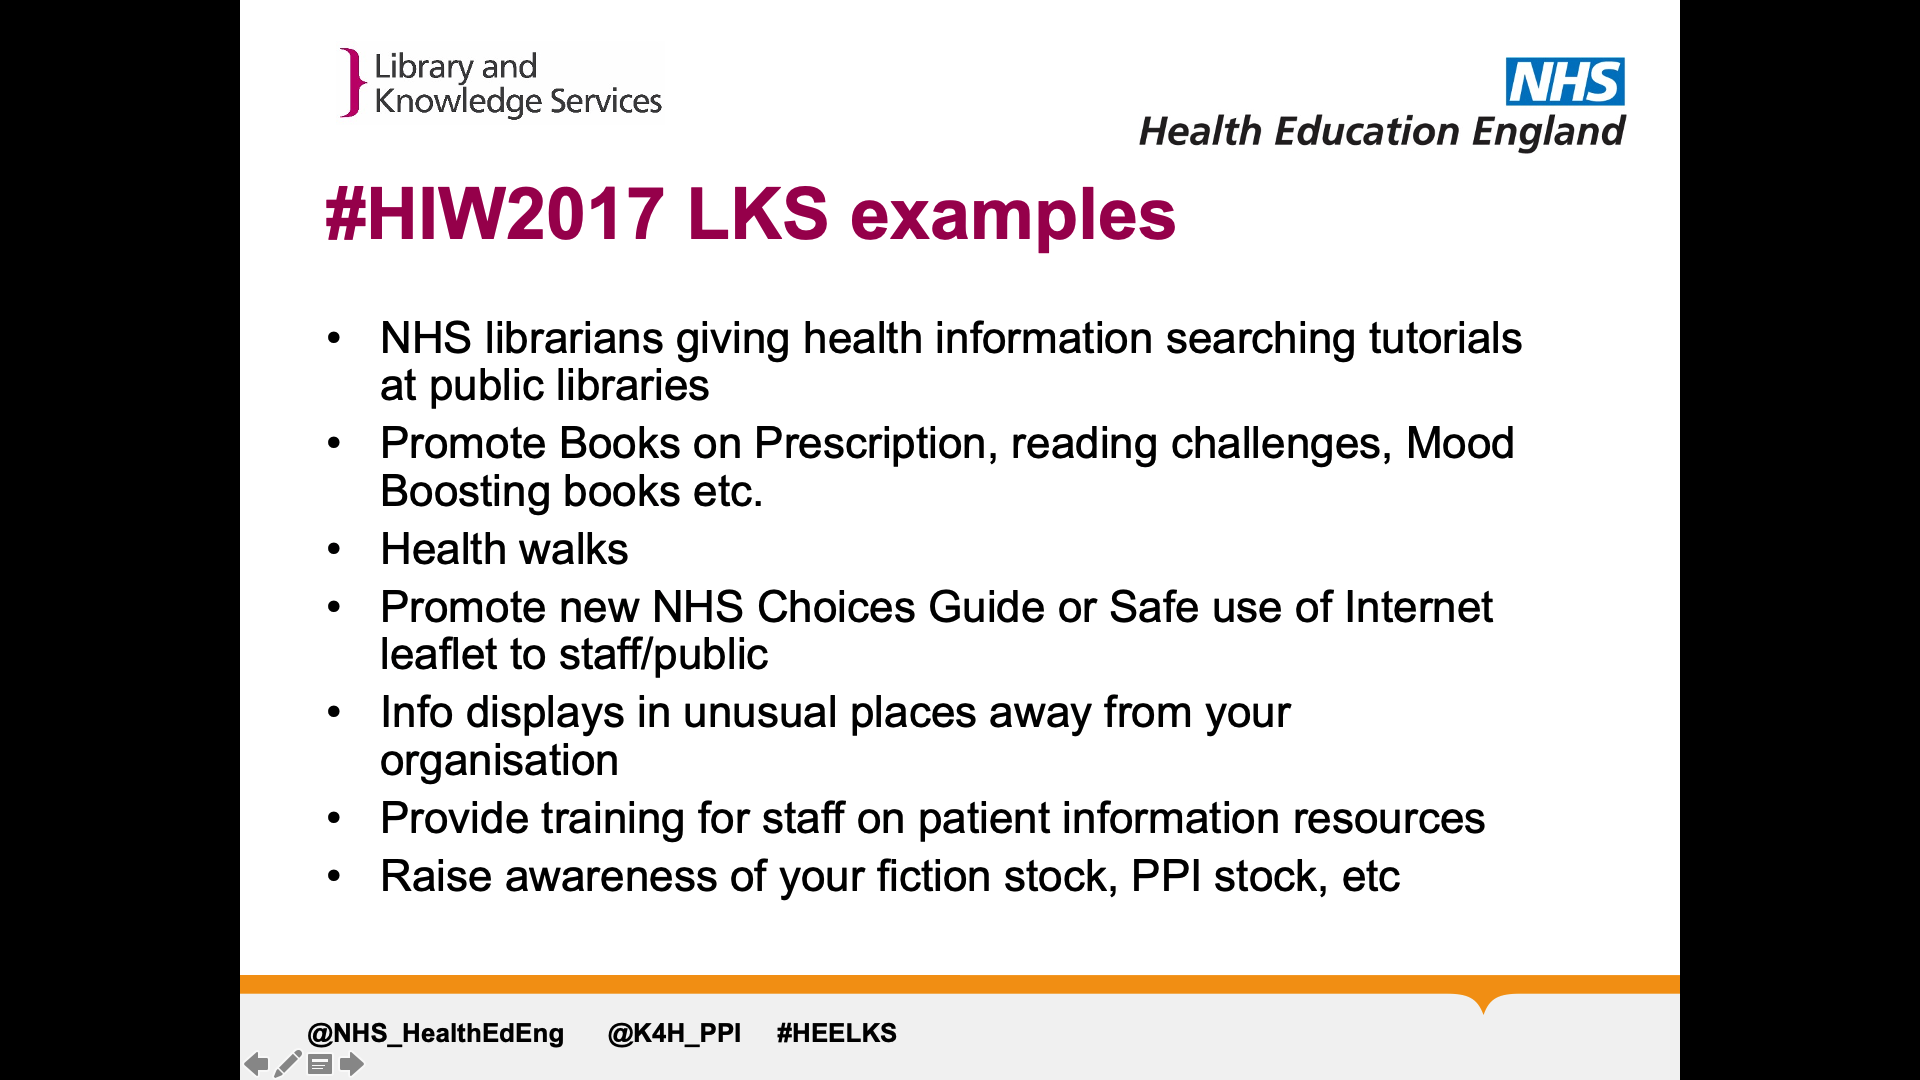 Title: #HIW2017 LKS examples. Text on page: NHS librarians giving health information searching tutorials at public libraries Promote Books on Prescription, reading challenges, Mood Boosting books etc. Health walks  Promote new NHS Choices Guide or Safe use of Internet leaflet to staff/public Info displays in unusual places away from your organisation Provide training for staff on patient information resources Raise awareness of your fiction stock, PPI stock, etc